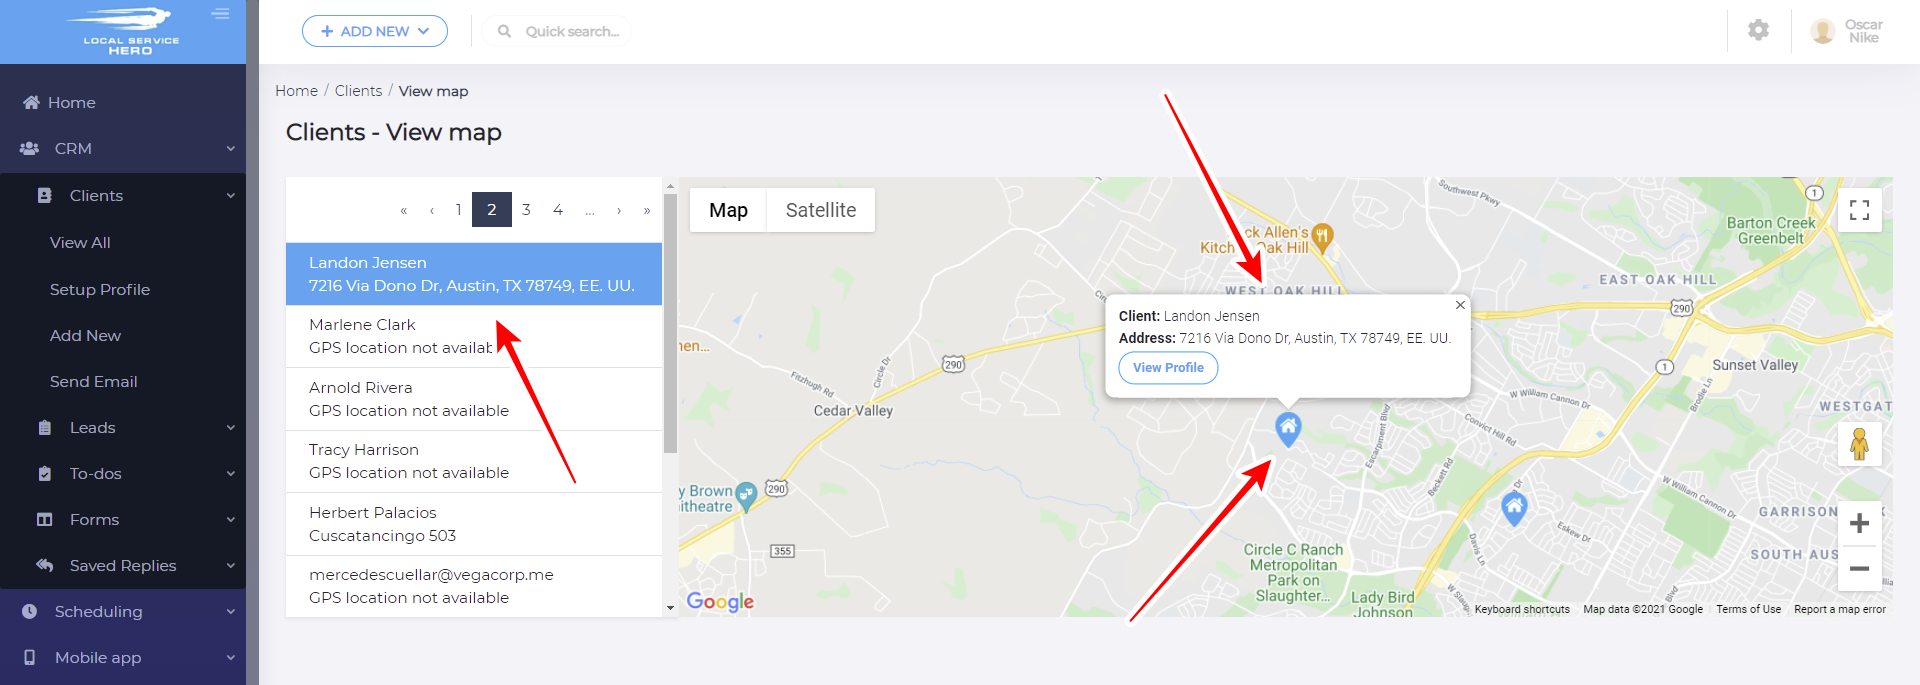 how to view your clients on a map local service hero